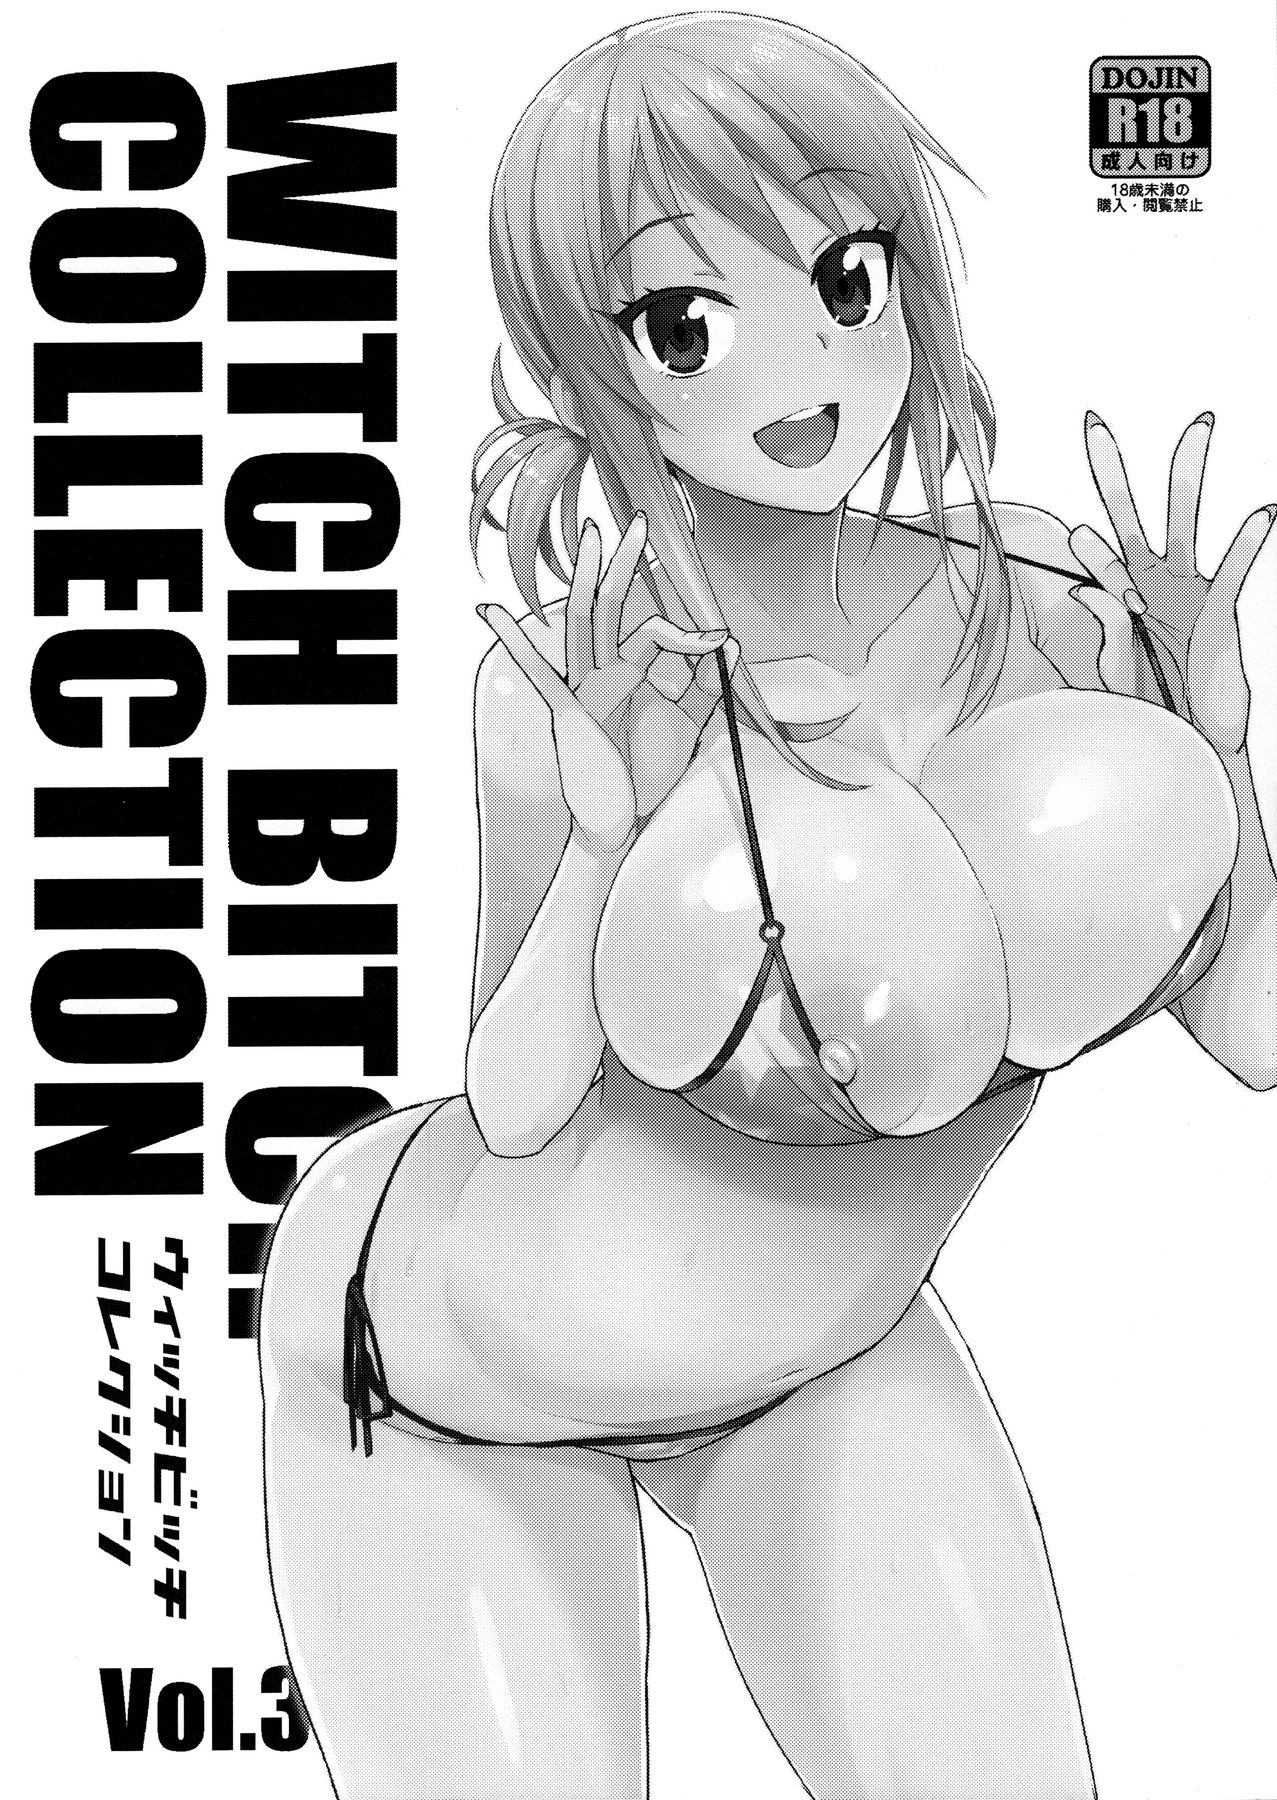 Witch Bitch Collection Vol. 3 numero d'image 23